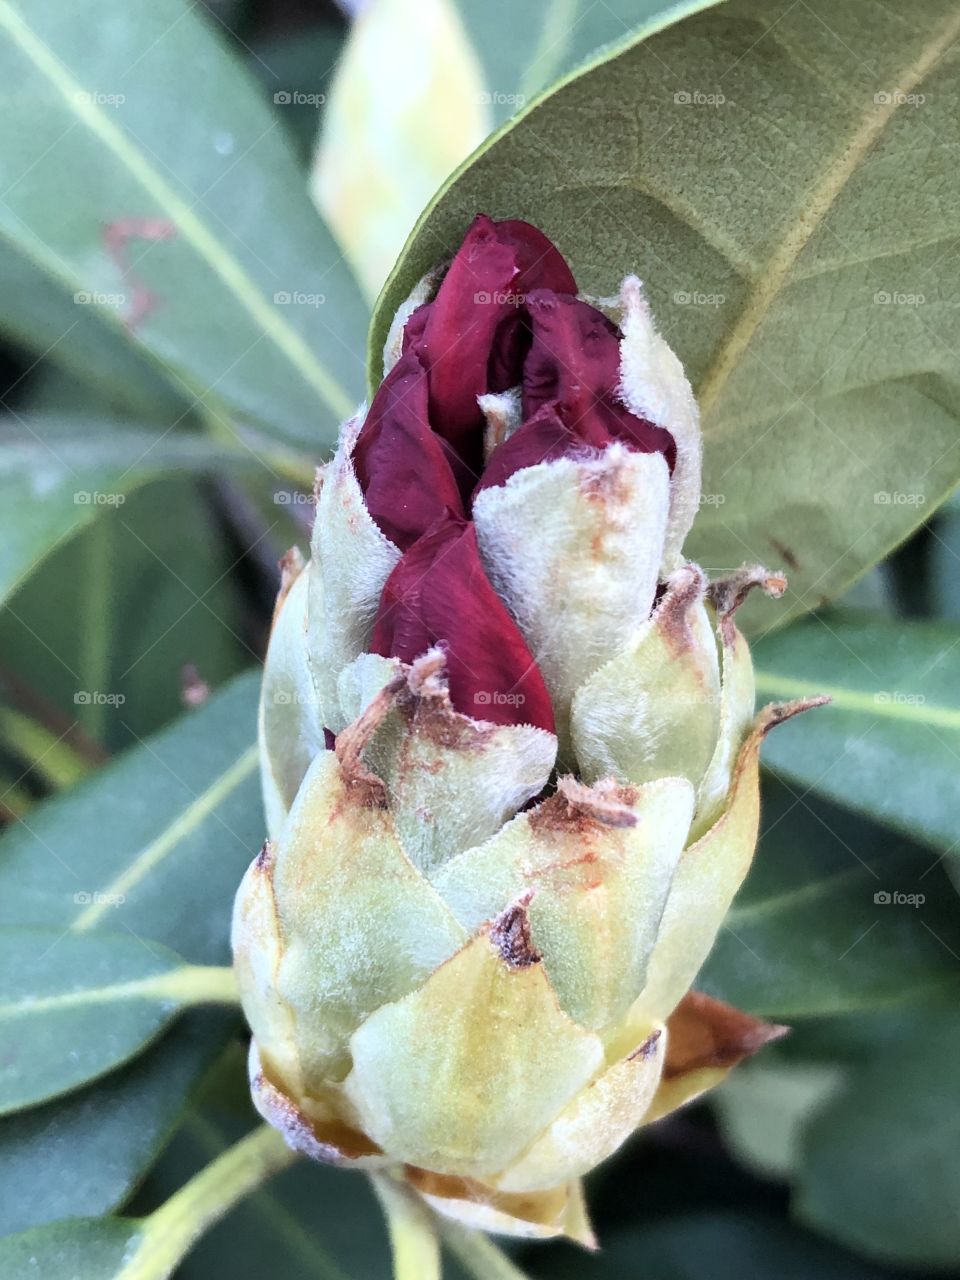 Rhododendron buds starting to show colour 